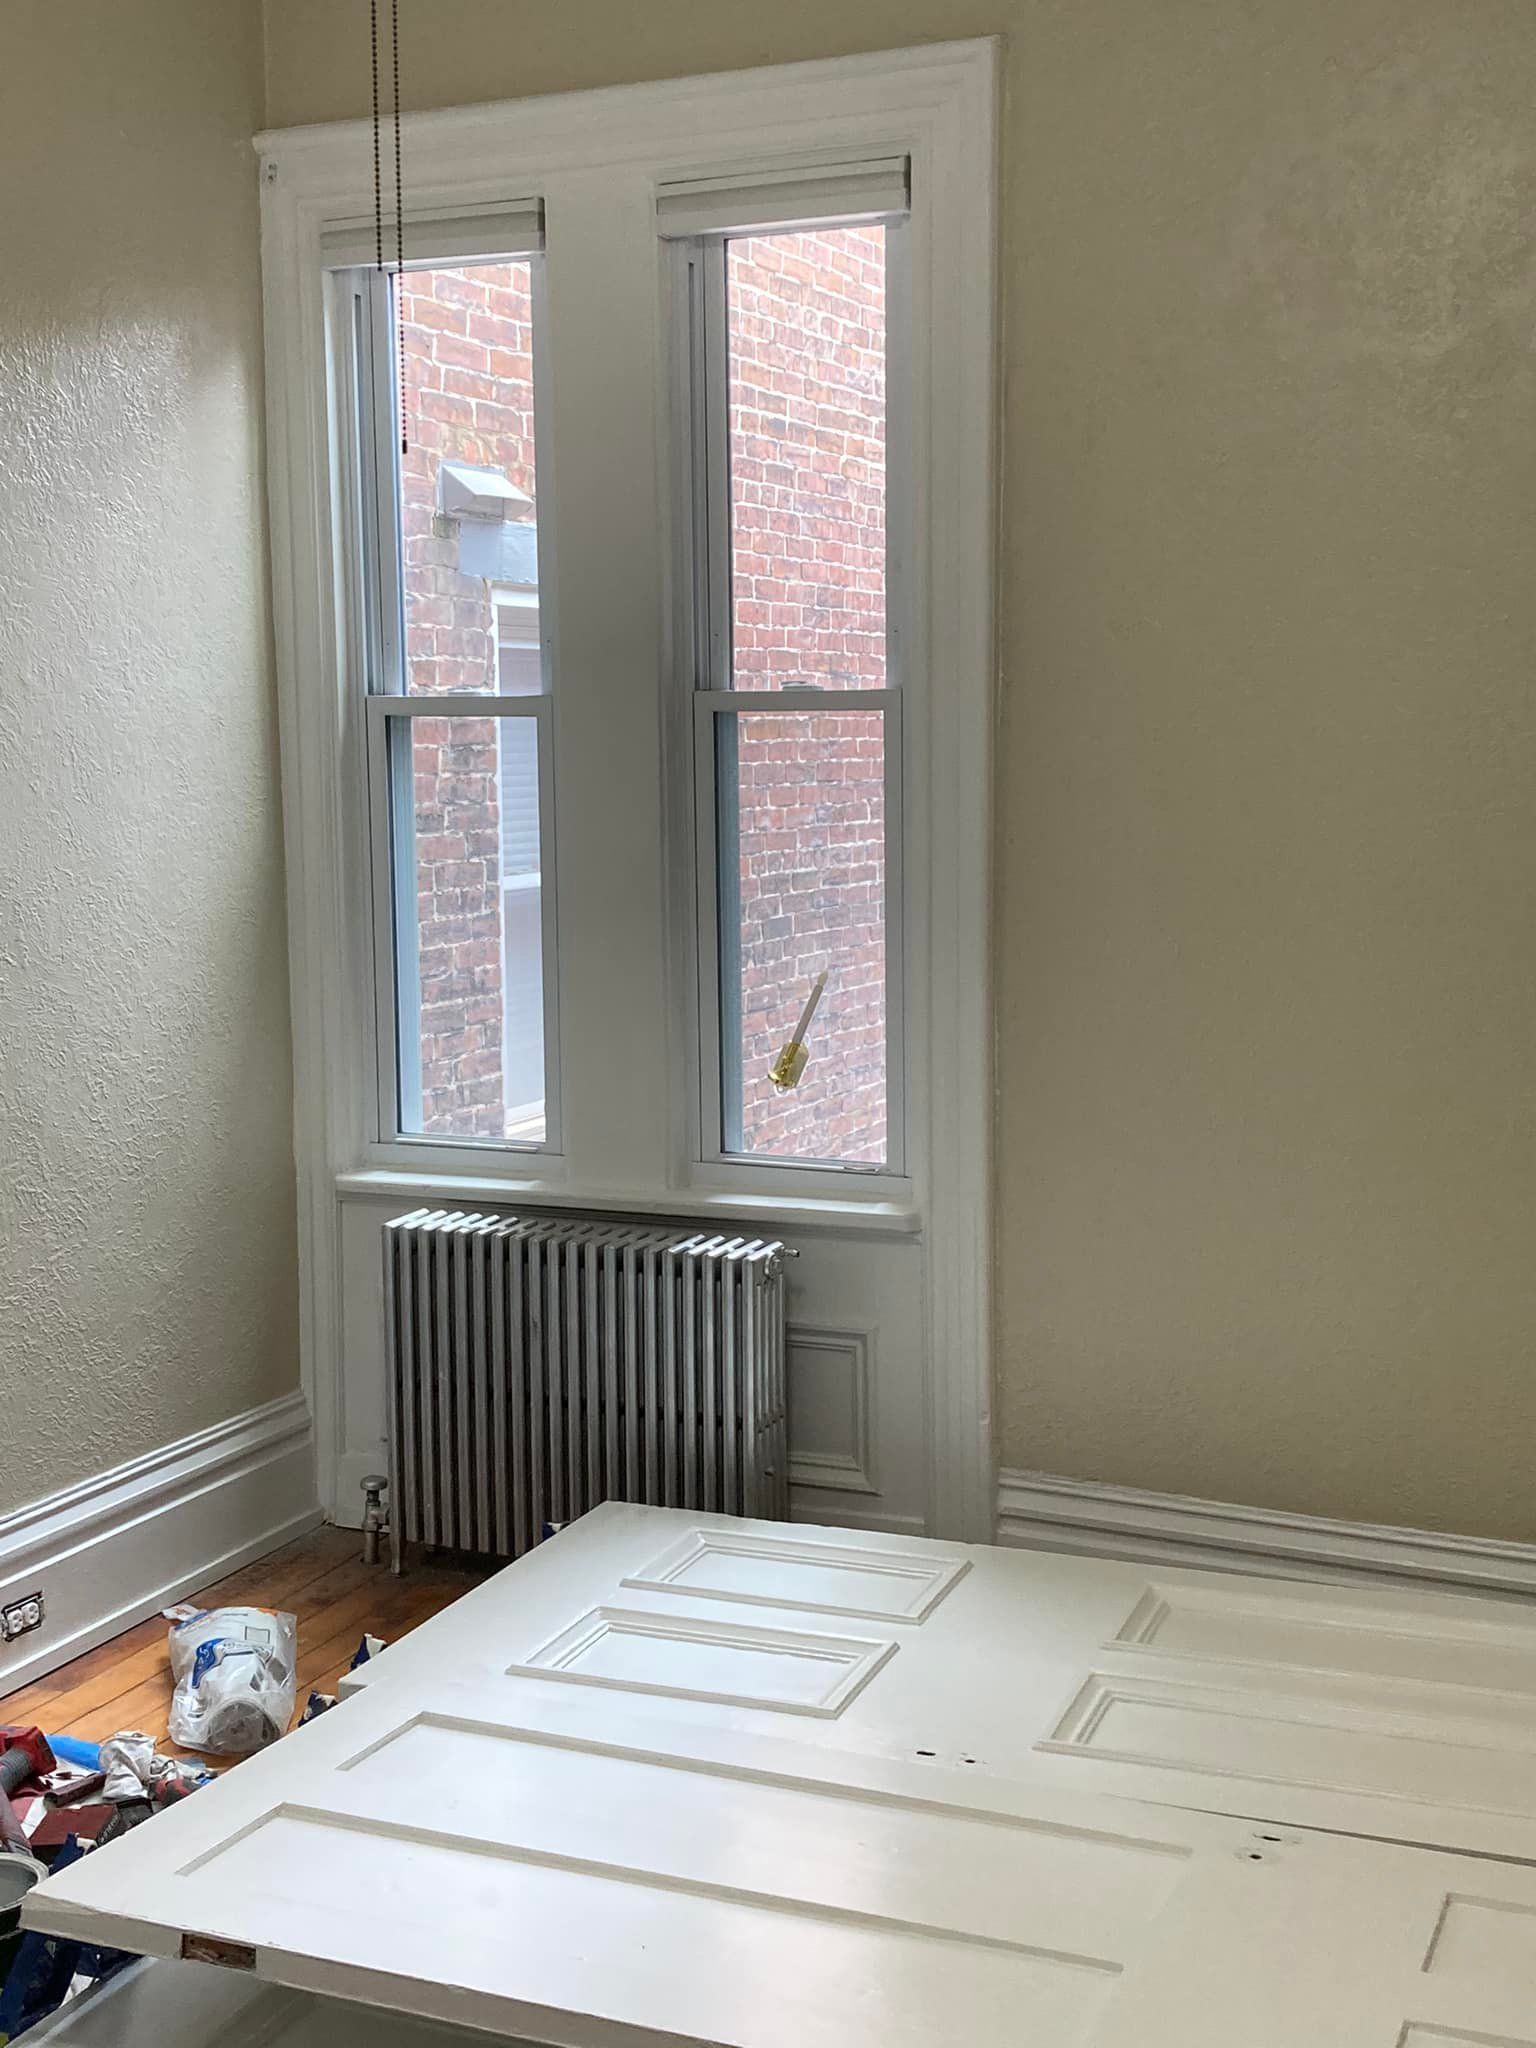 Windows And Door On Ground — Pittsburgh, PA — Ahrn City Contracting LLC